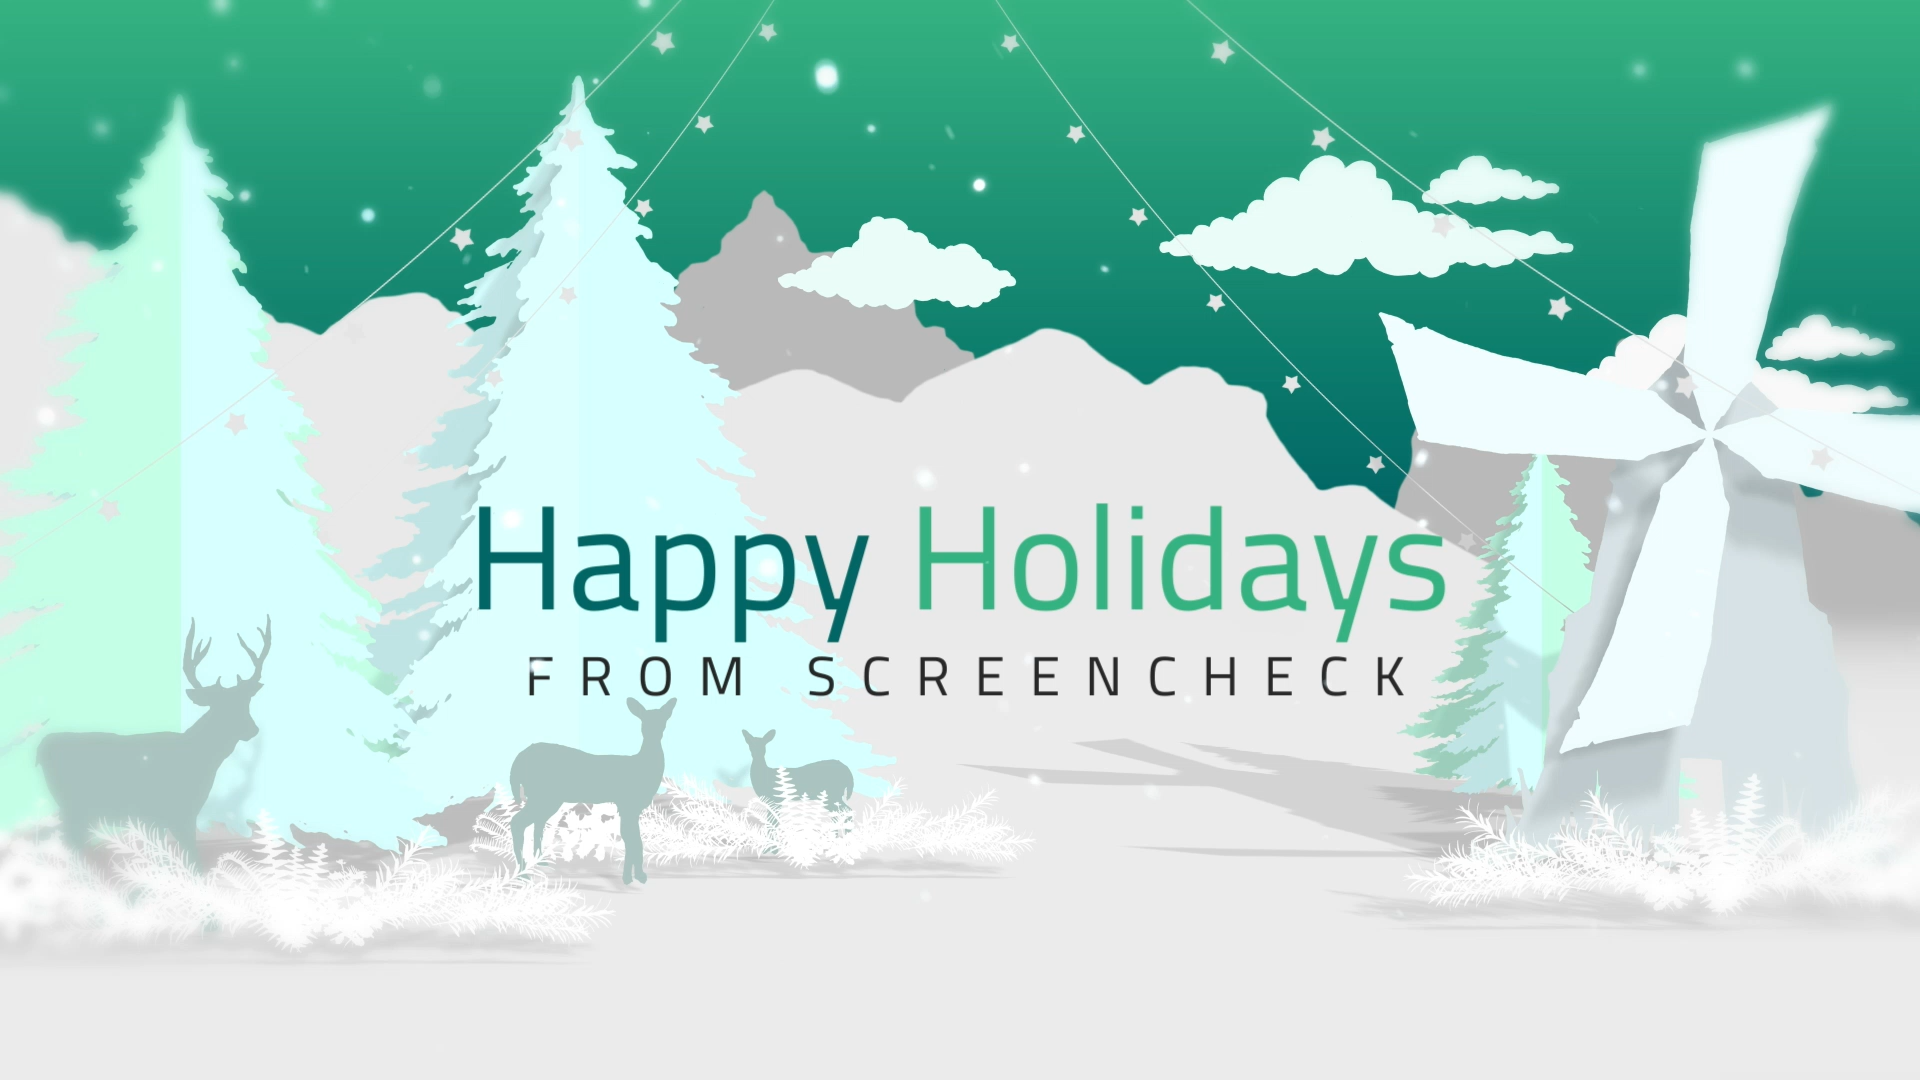 Happy Holidays from ScreenCheck